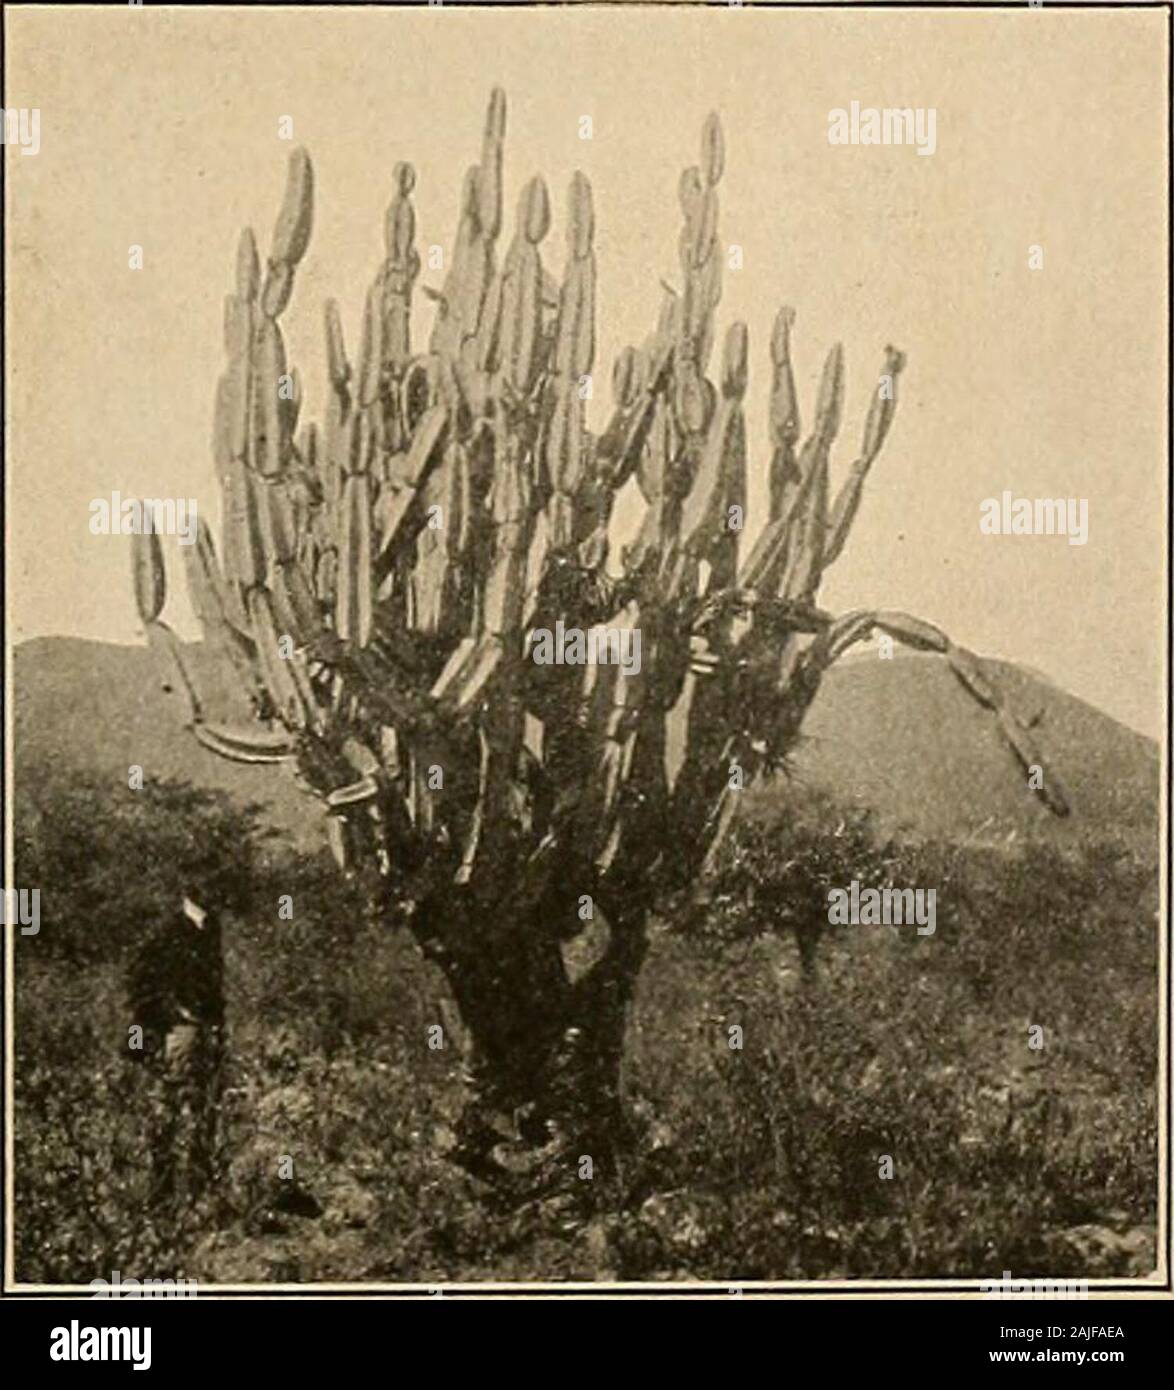 The Cactaceae : descriptions and illustrations of plants of the cactus family . Britton and Rose, Journ. X. V. Bot. Card. 20: 157. n;n,. Cactus laetus Humboldt, Bonpland, and Kunth, Nov. Gen. et Sp. 6: 68. 1823.Cereus lad us Dc Candolle, Prodr. 3: 466. 1828. Plant 4 to 6 meters high, much branched, bluish gray but not glaucous; ribs 4 to 8, prominent;areoles 2 to 3 cm. apart; spines brown when young, becoming gray to nearly white in age, usually1 to 3 cm. but sometimes 8 cm. long, subulate; flowers 7 to 8 cm. long; inner perianth-segmentswhite, 2 em. long; fruit green without, very spiny, spli Stock Photo